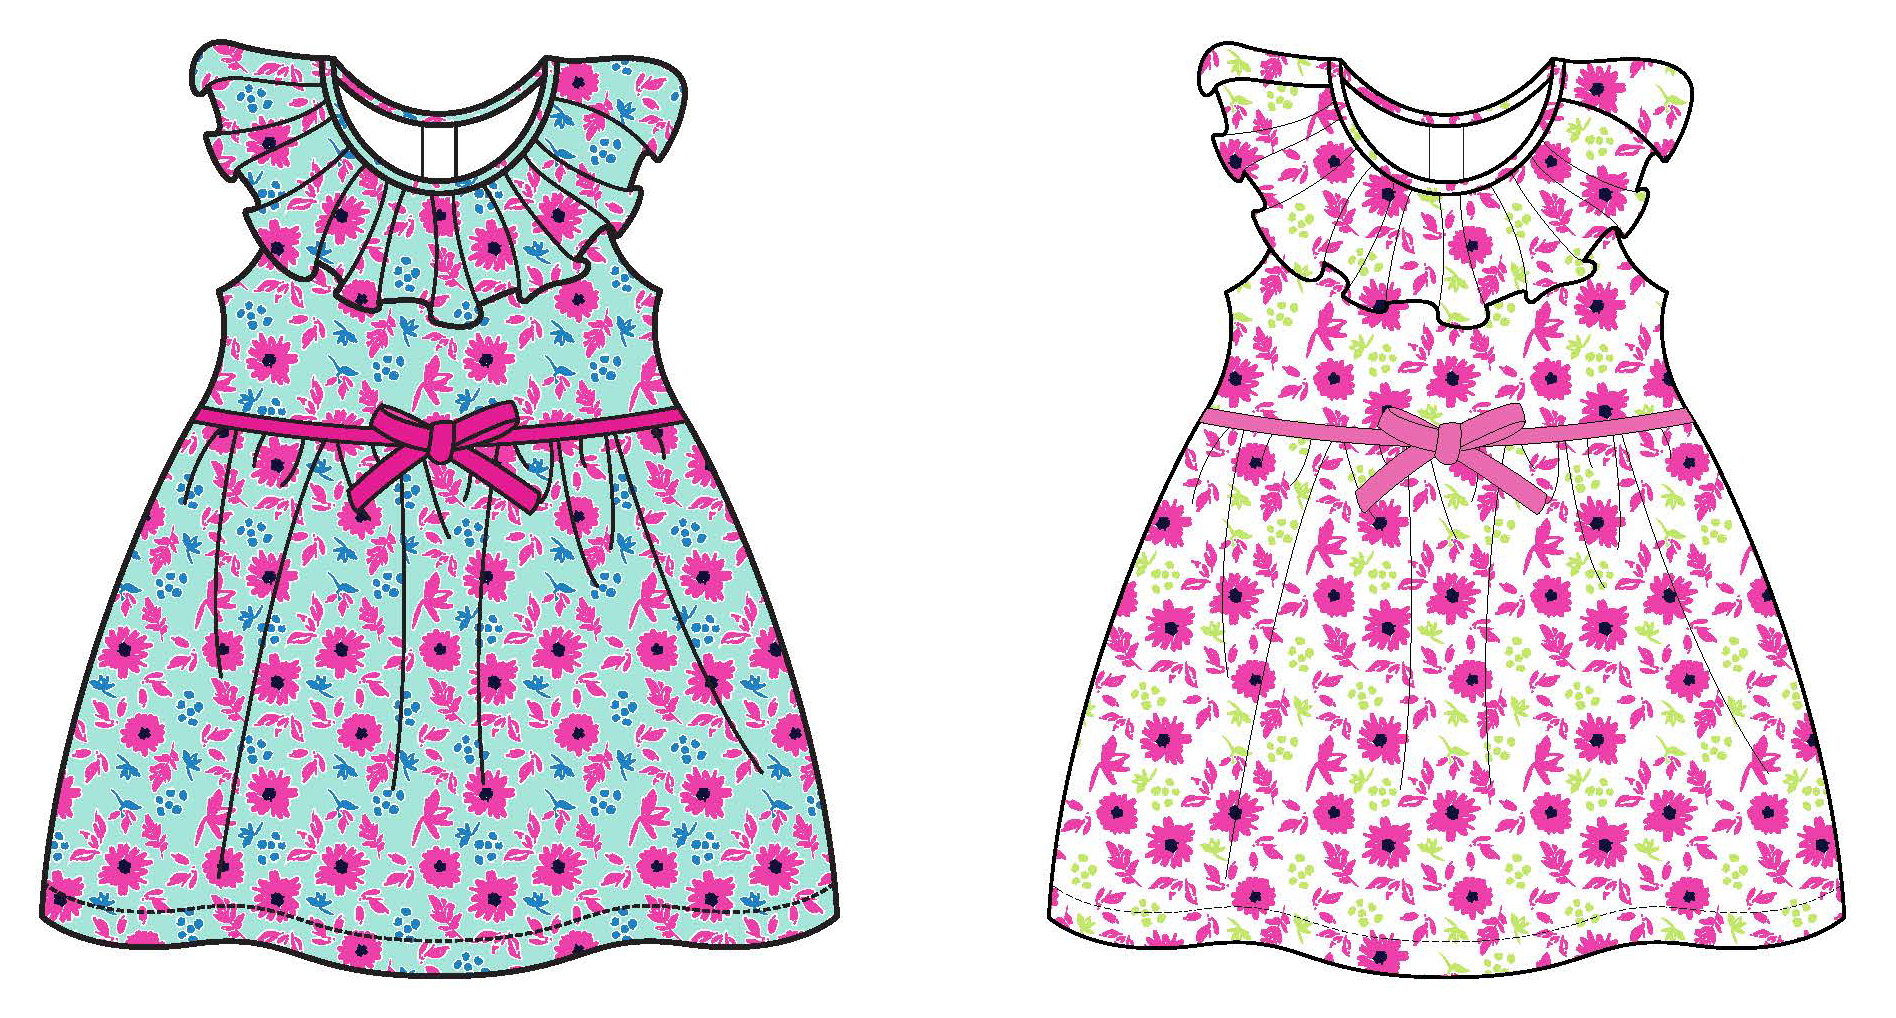 Toddler Girl's Printed Knit Sleeveless Dress w/ UNDERWEAR Panty & Embroidered Ribbon - Liberty Flora